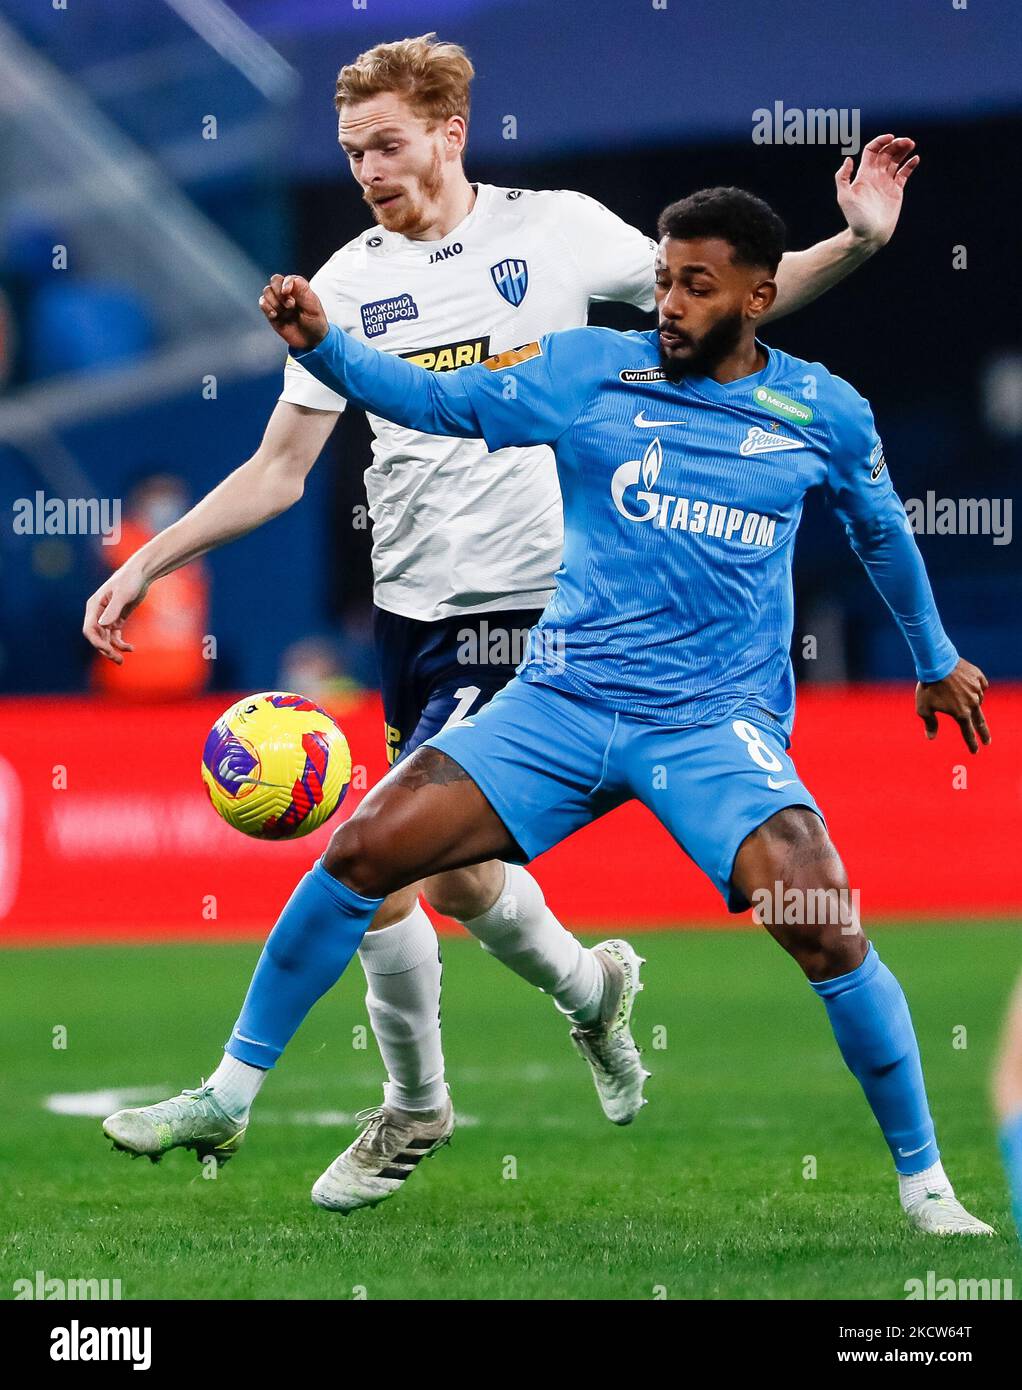 Wendel (R) of Zenit St. Petersburg and Pavel Mogilevets of Nizhny Novgorod vie for the ball during the Russian Premier League match between FC Zenit Saint Petersburg and FC Nizhny Novgorod on November 19, 2021 at Gazprom Arena in Saint Petersburg, Russia. (Photo by Mike Kireev/NurPhoto) Stock Photo